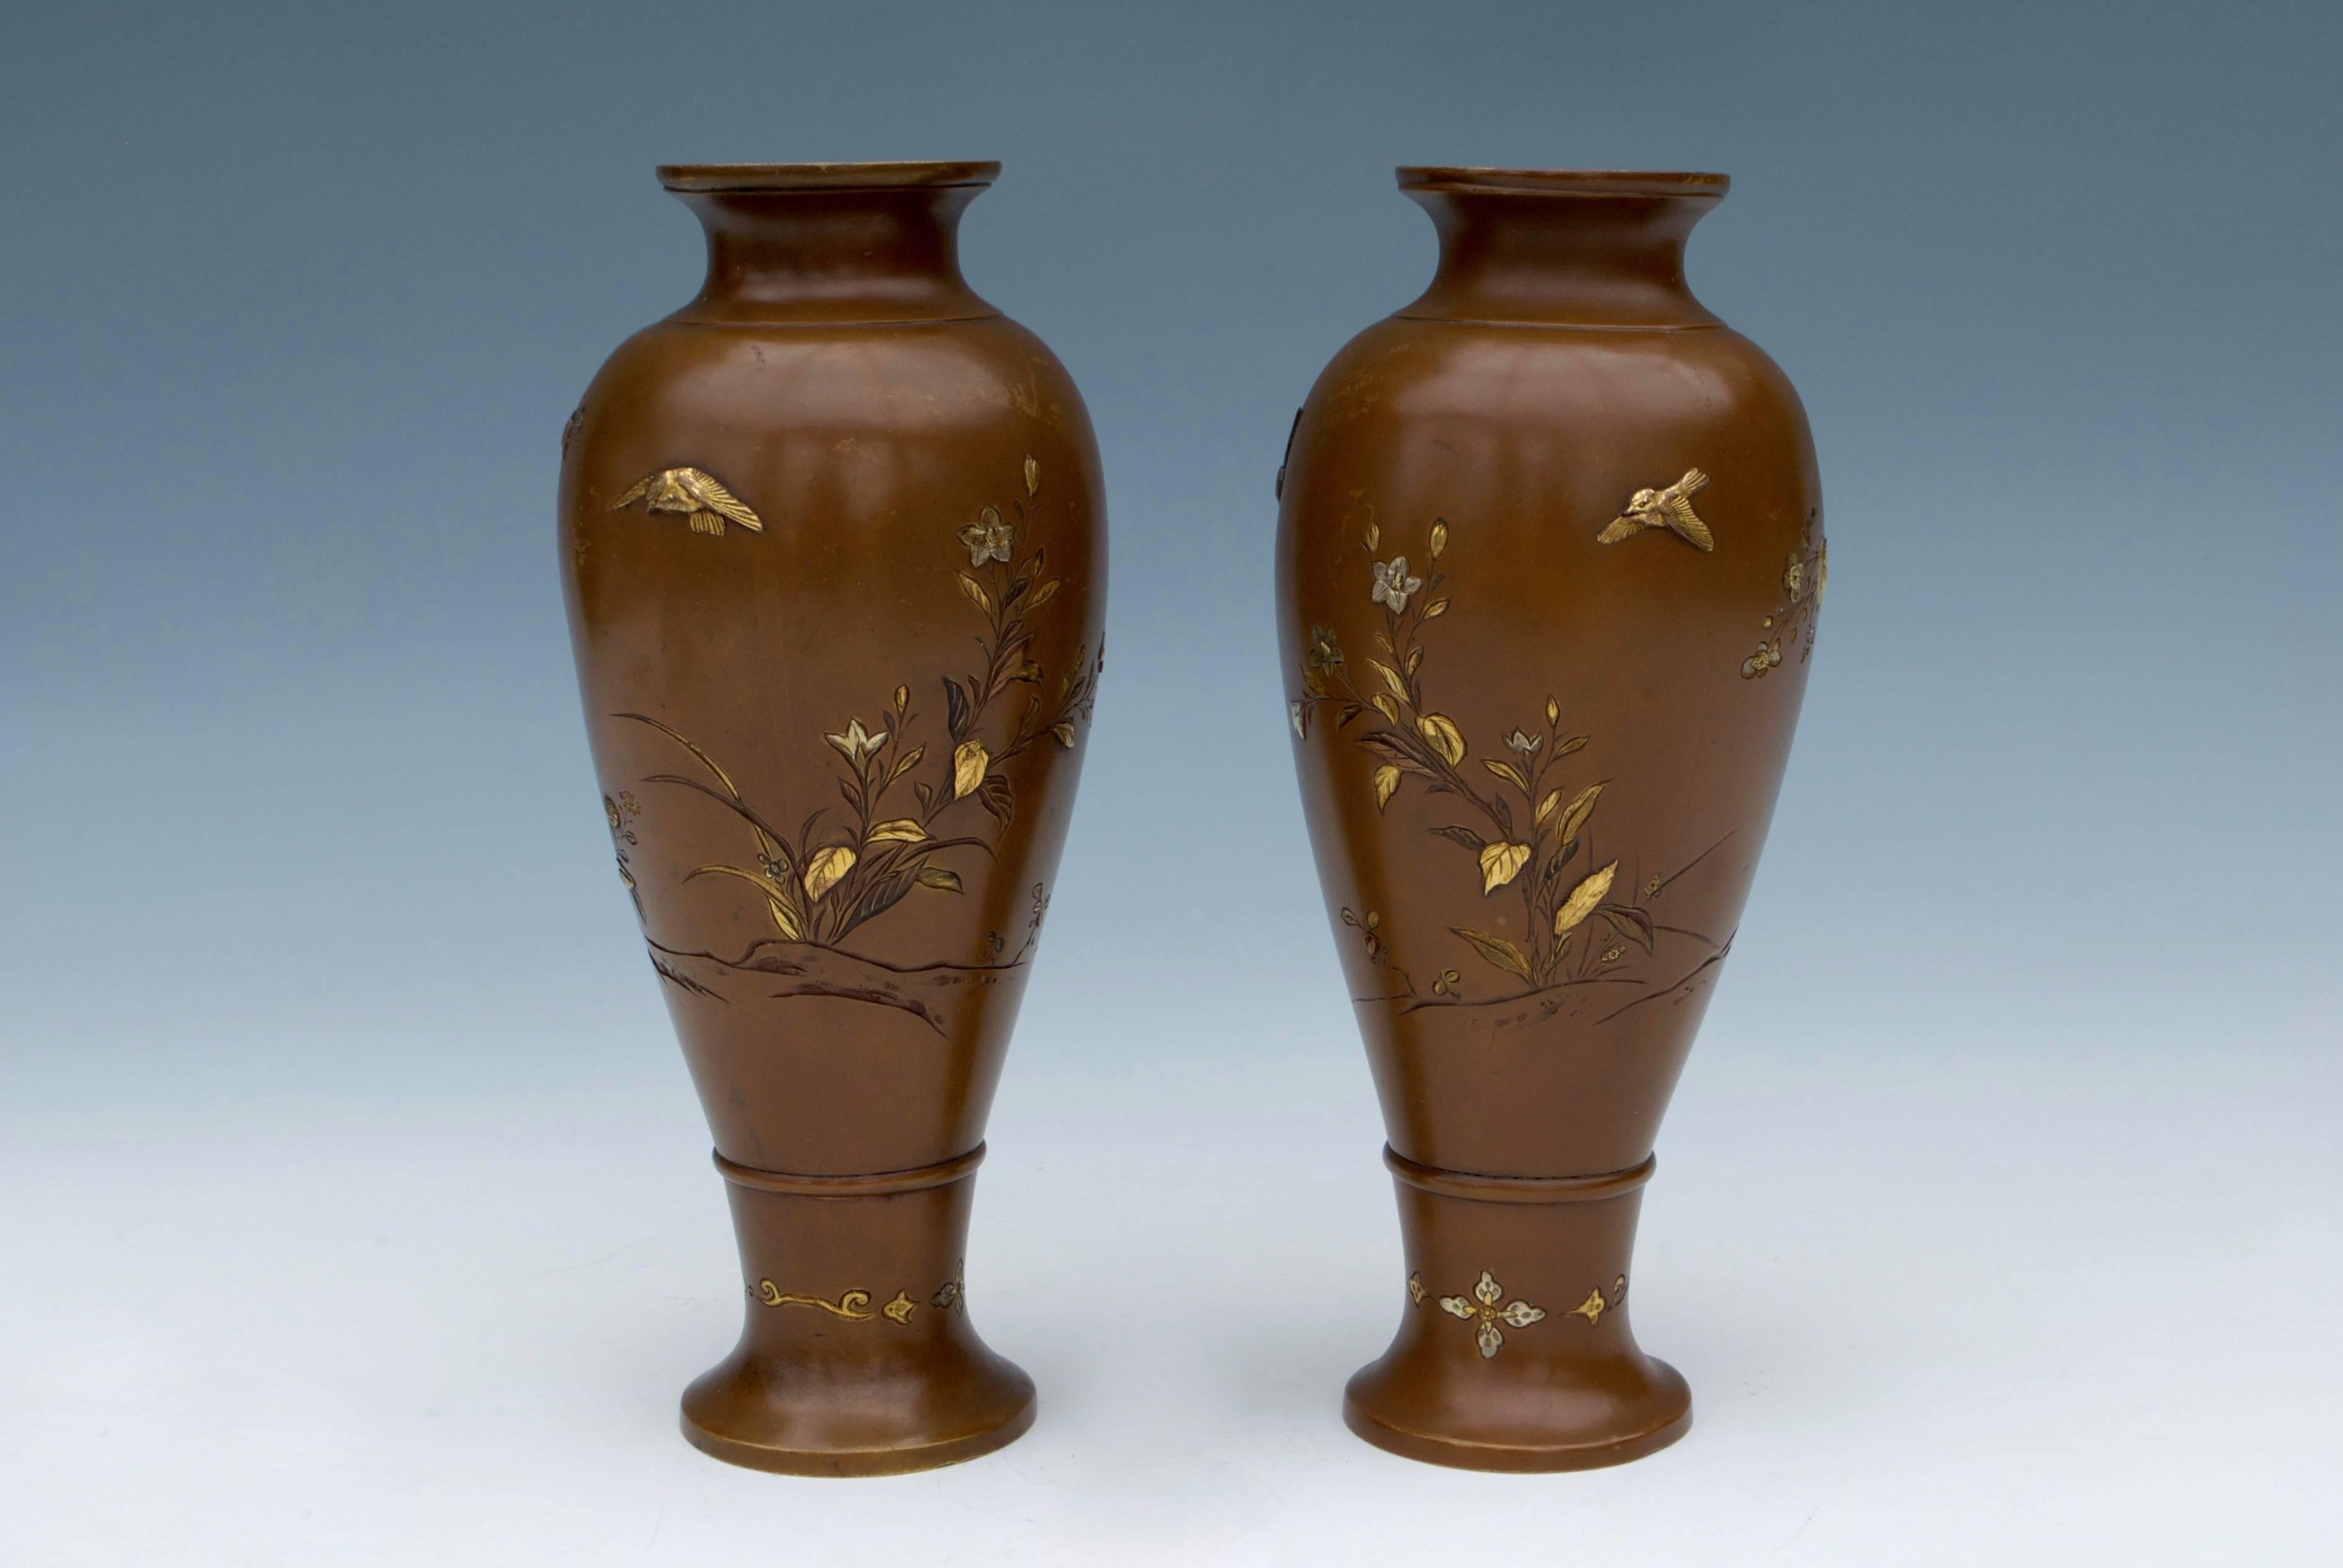 Elegant pair of finely bronze vases decorated with floral motifs with gold and silver inlay applications. Hatayama signature under the base.